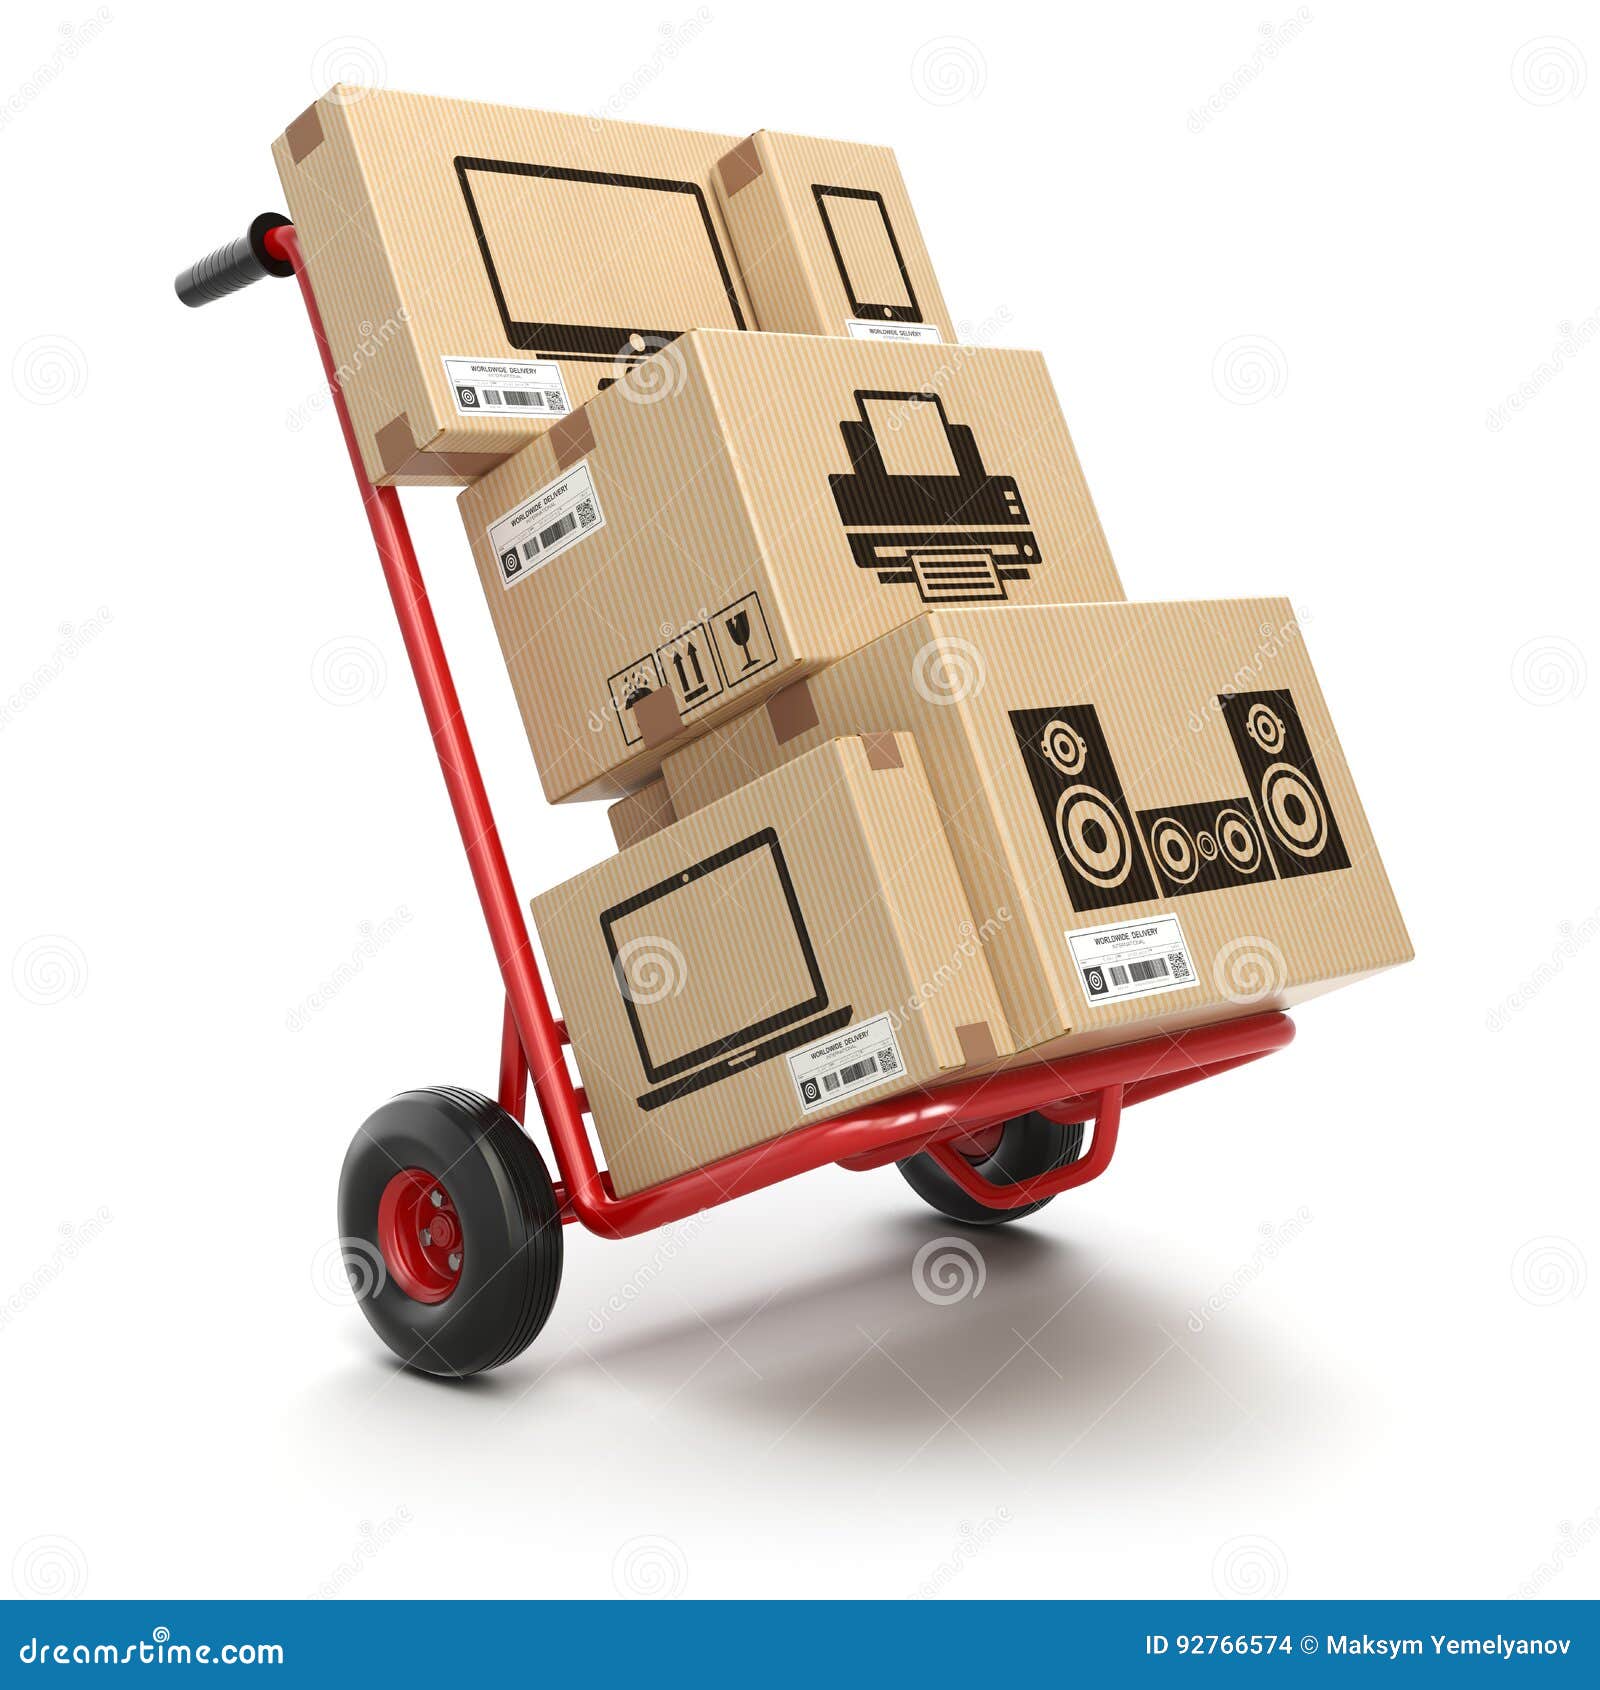 sale and delivery of computer technics concept. hand truck and c